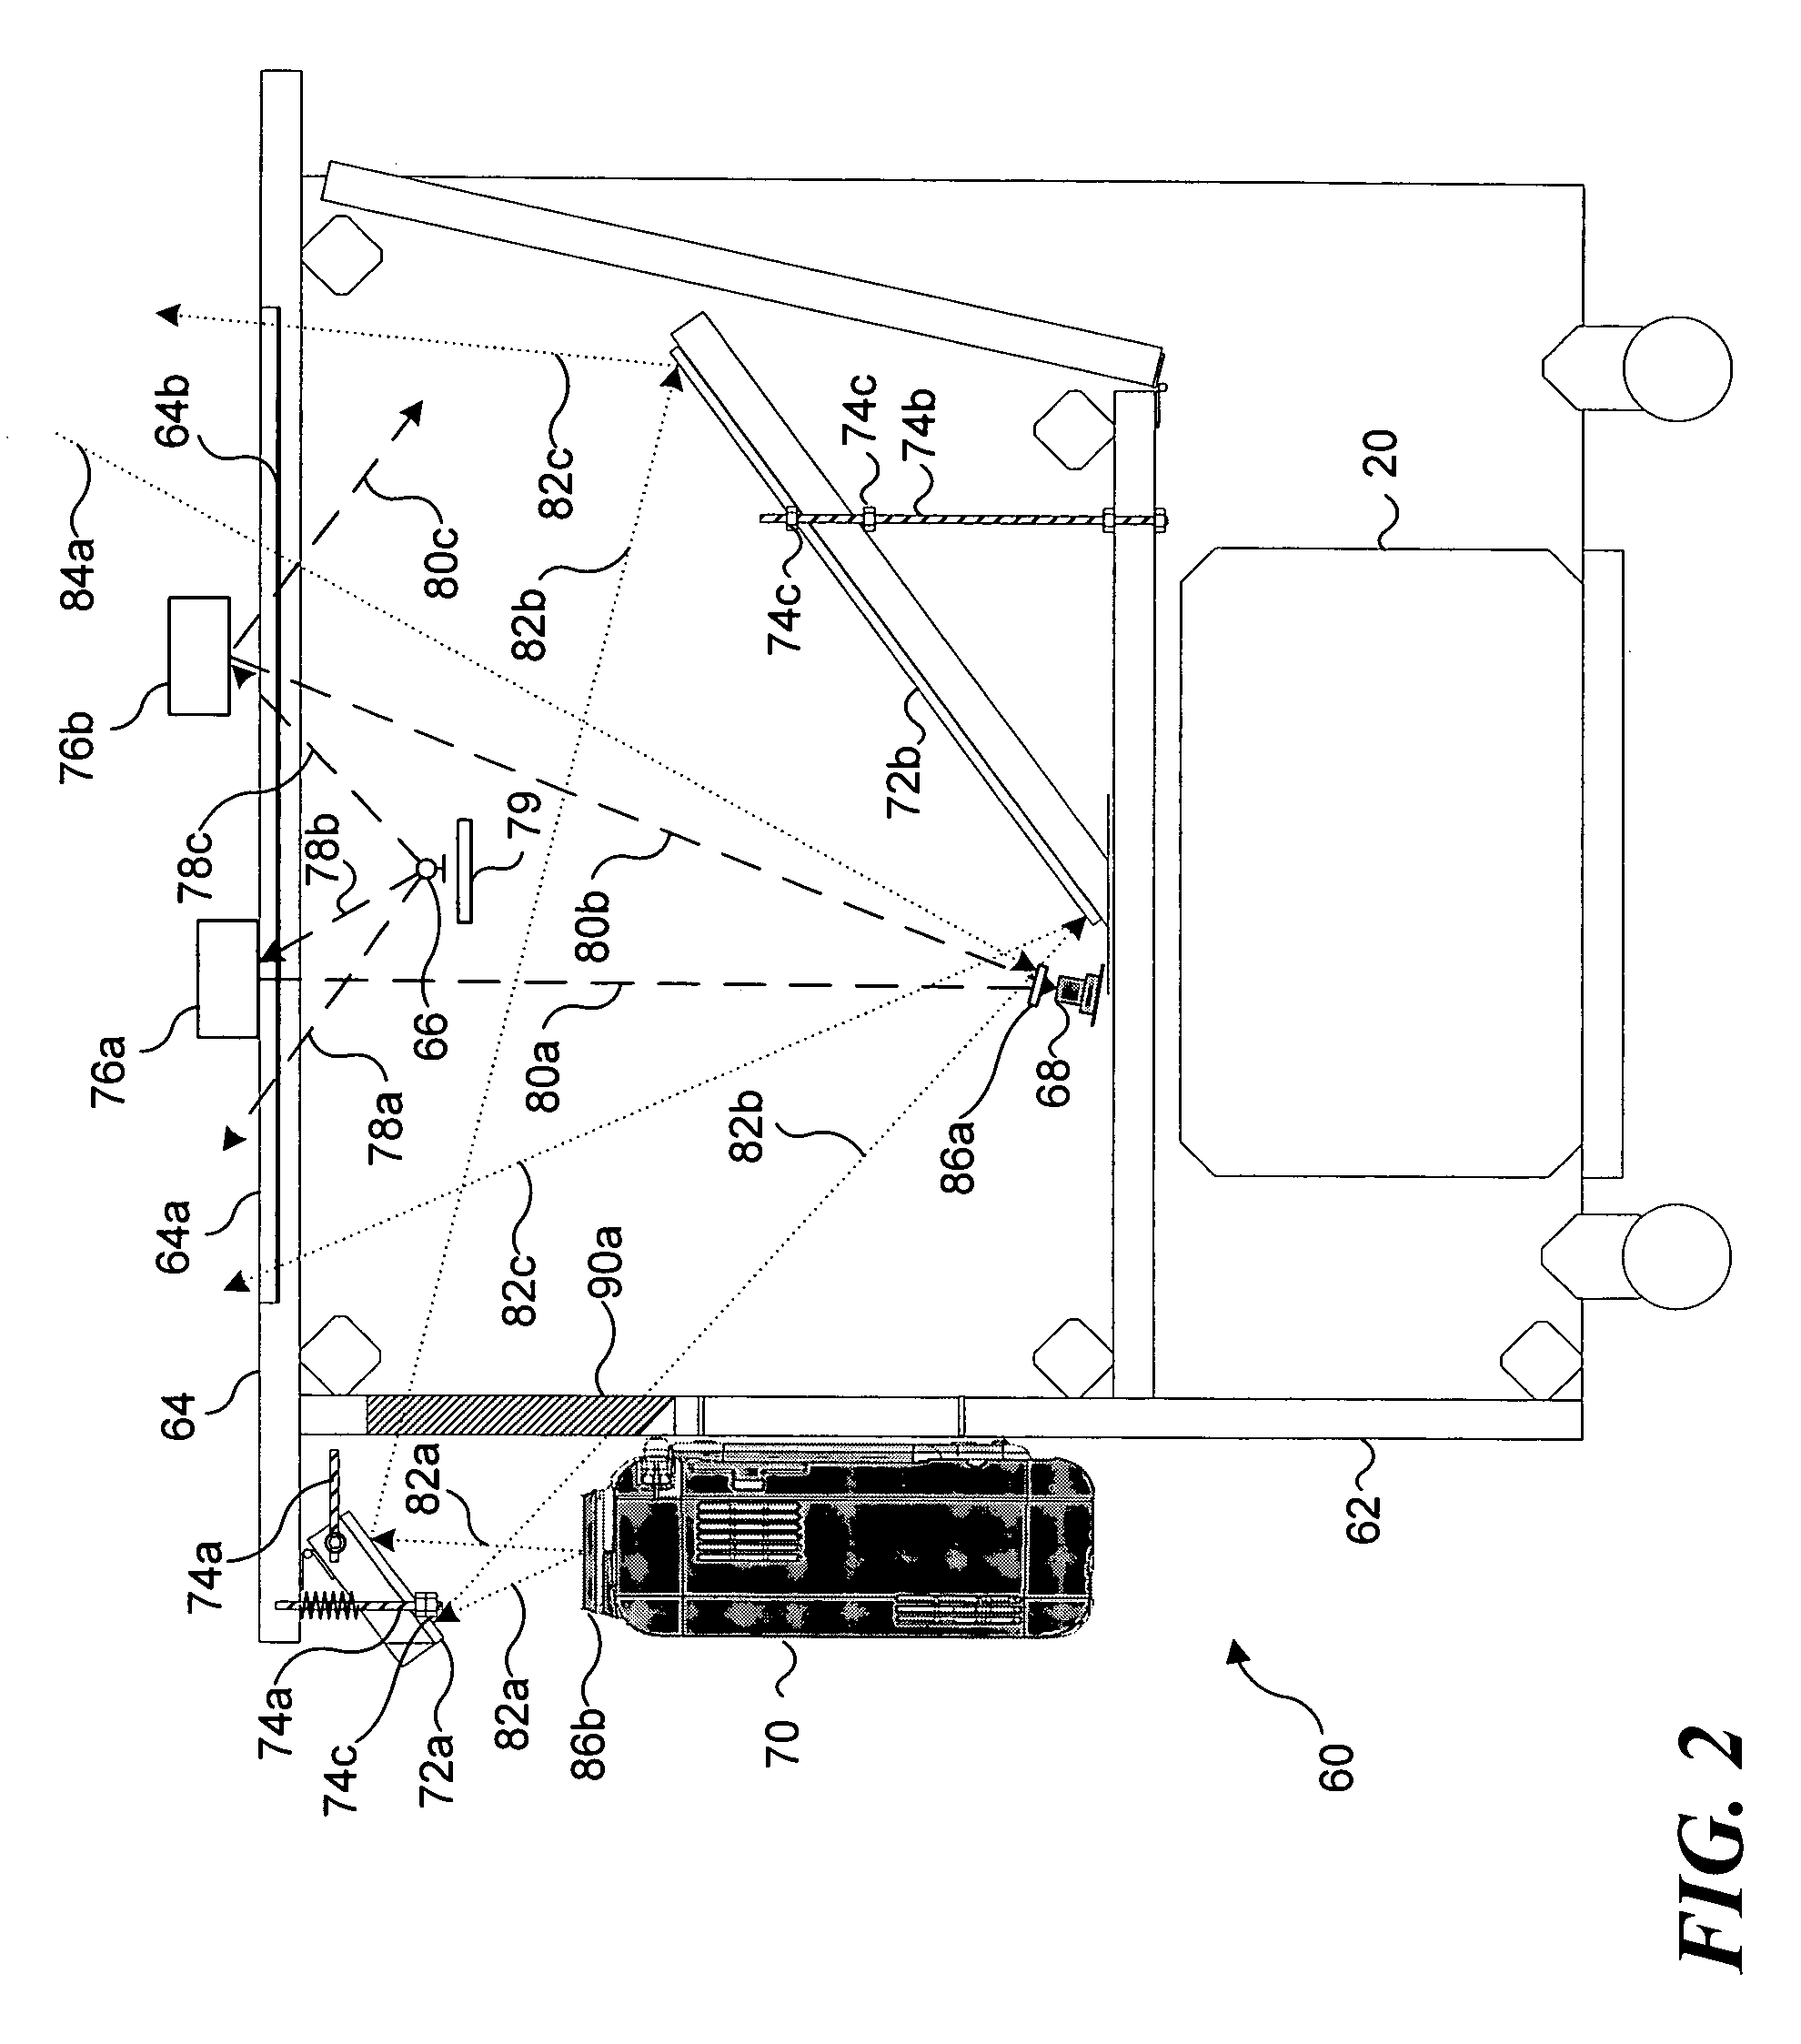 Using size and shape of a physical object to manipulate output in an interactive display application